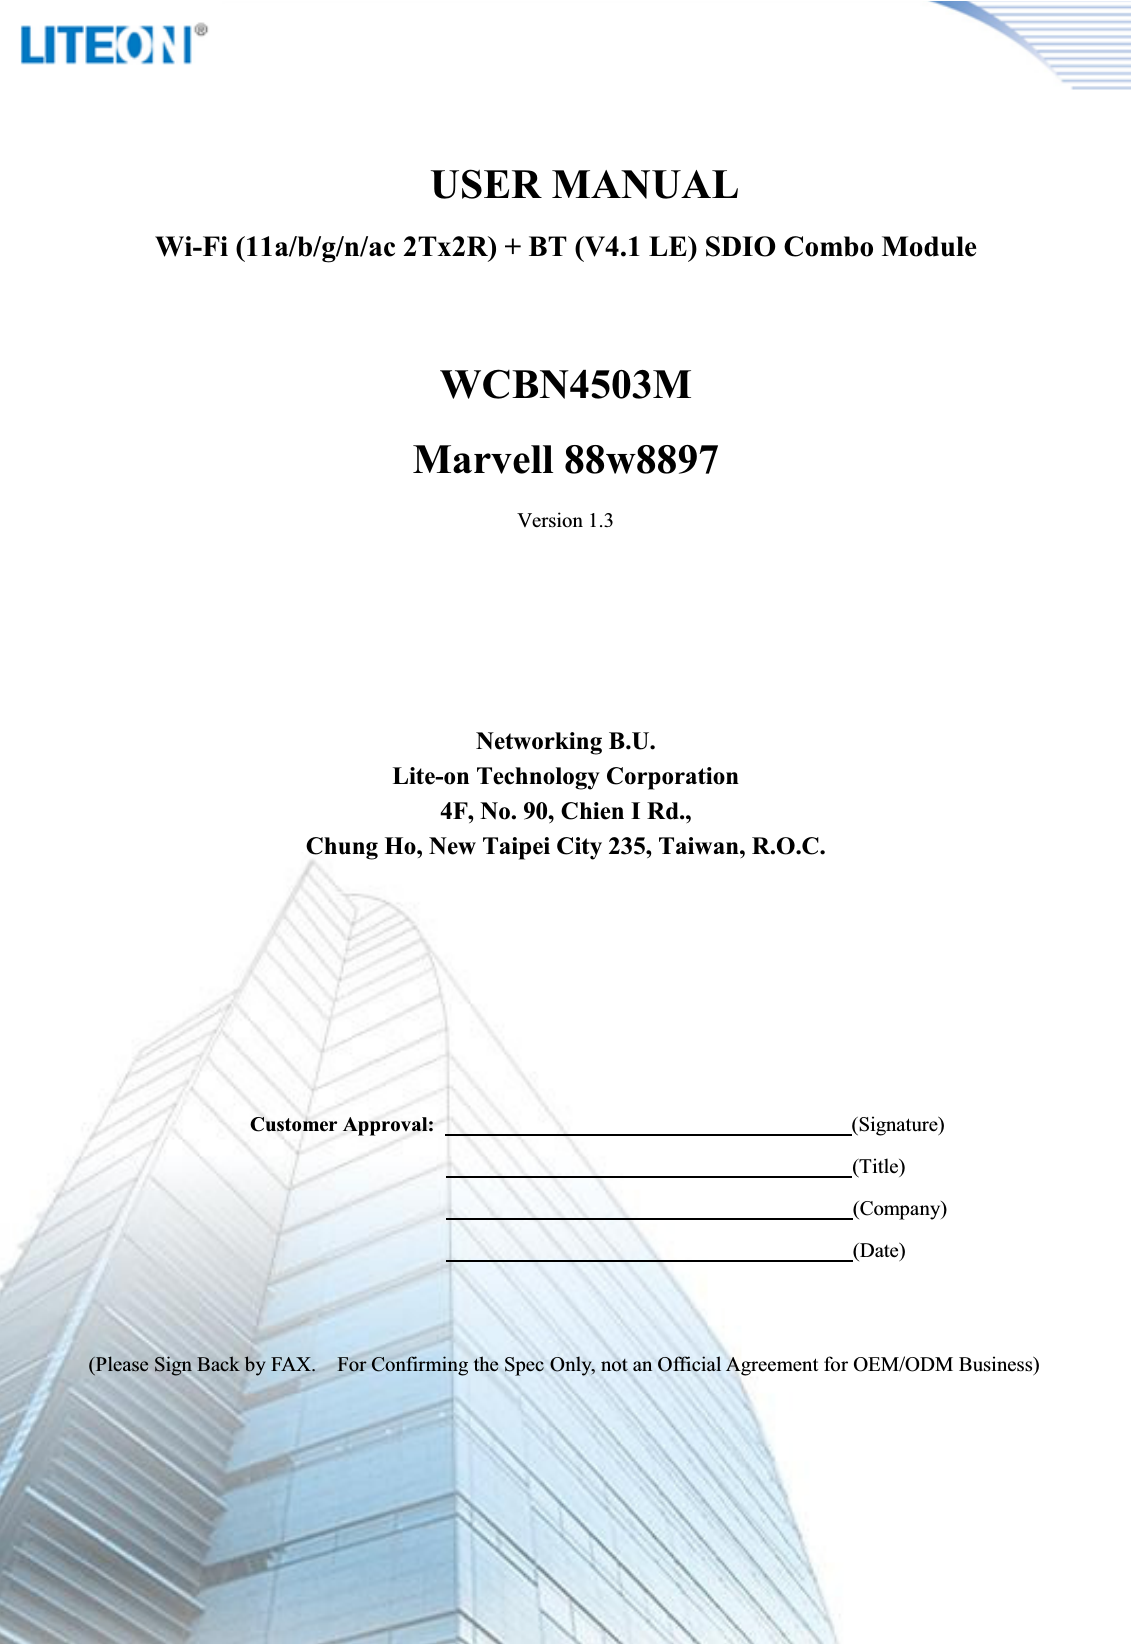 Page 2/14             USER MANUAL Wi-Fi (11a/b/g/n/ac 2Tx2R) + BT (V4.1 LE) SDIO Combo ModuleWCBN4503MMarvell 88w8897Version 1.3Networking B.U.Lite-on Technology Corporation4F, No. 90, Chien I Rd.,Chung Ho, New Taipei City 235, Taiwan, R.O.C.Customer Approval:                                                                                (Signature)                                                                                                                              (Title)                                                                                                                                          (Company)                                                                                                                                          (Date)(Please Sign Back by FAX.    For Confirming the Spec Only, not an Official Agreement for OEM/ODM Business)